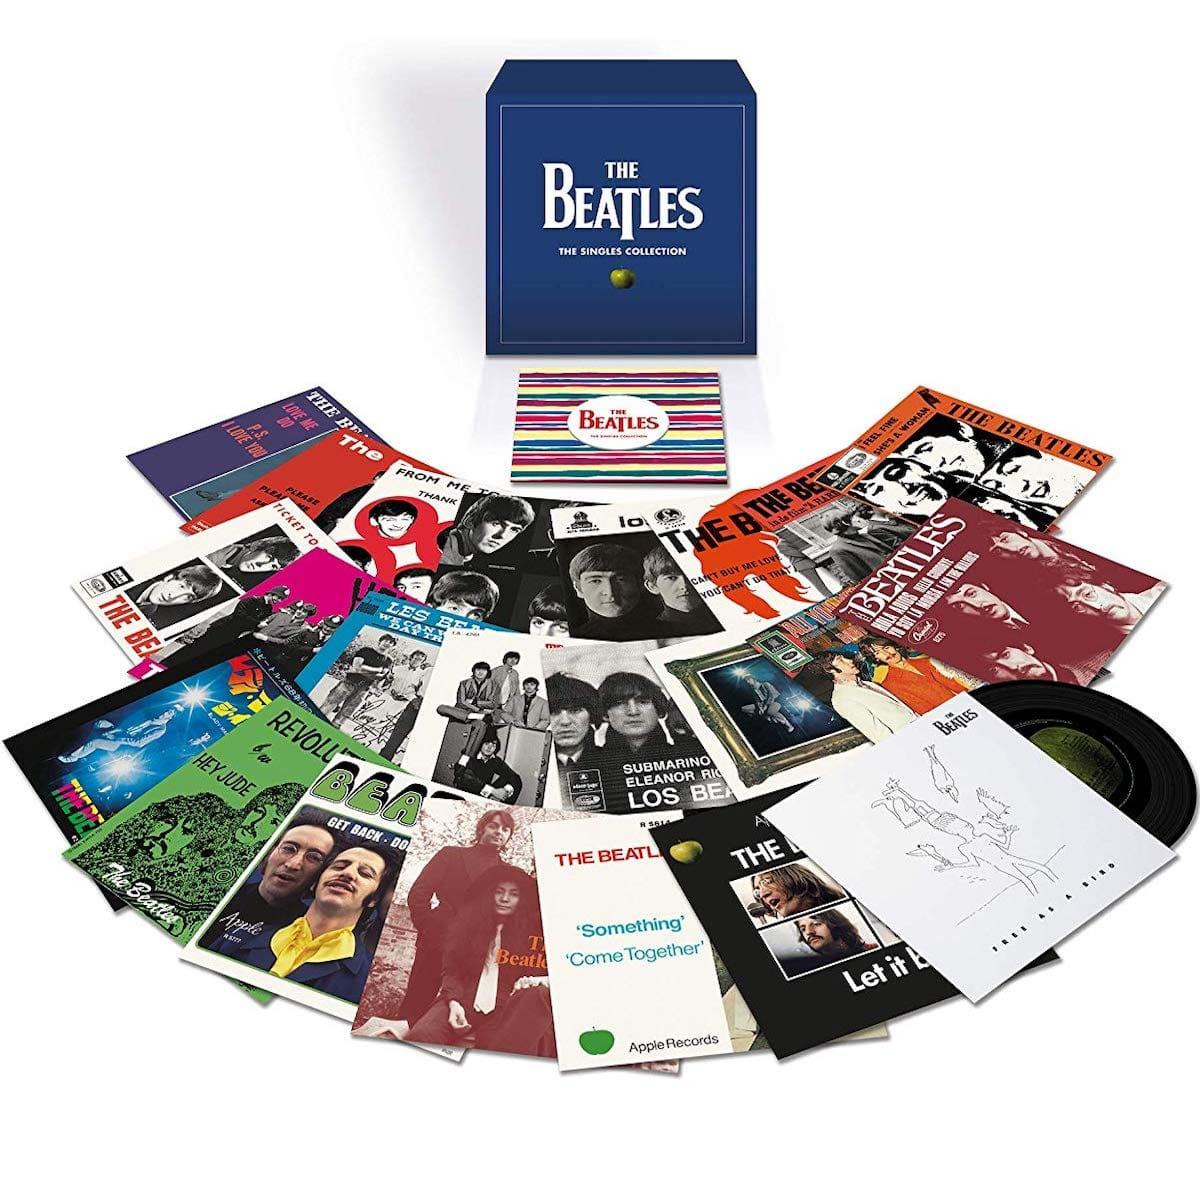 The Beatles - The Singles Collection (Limited Edition Box Set